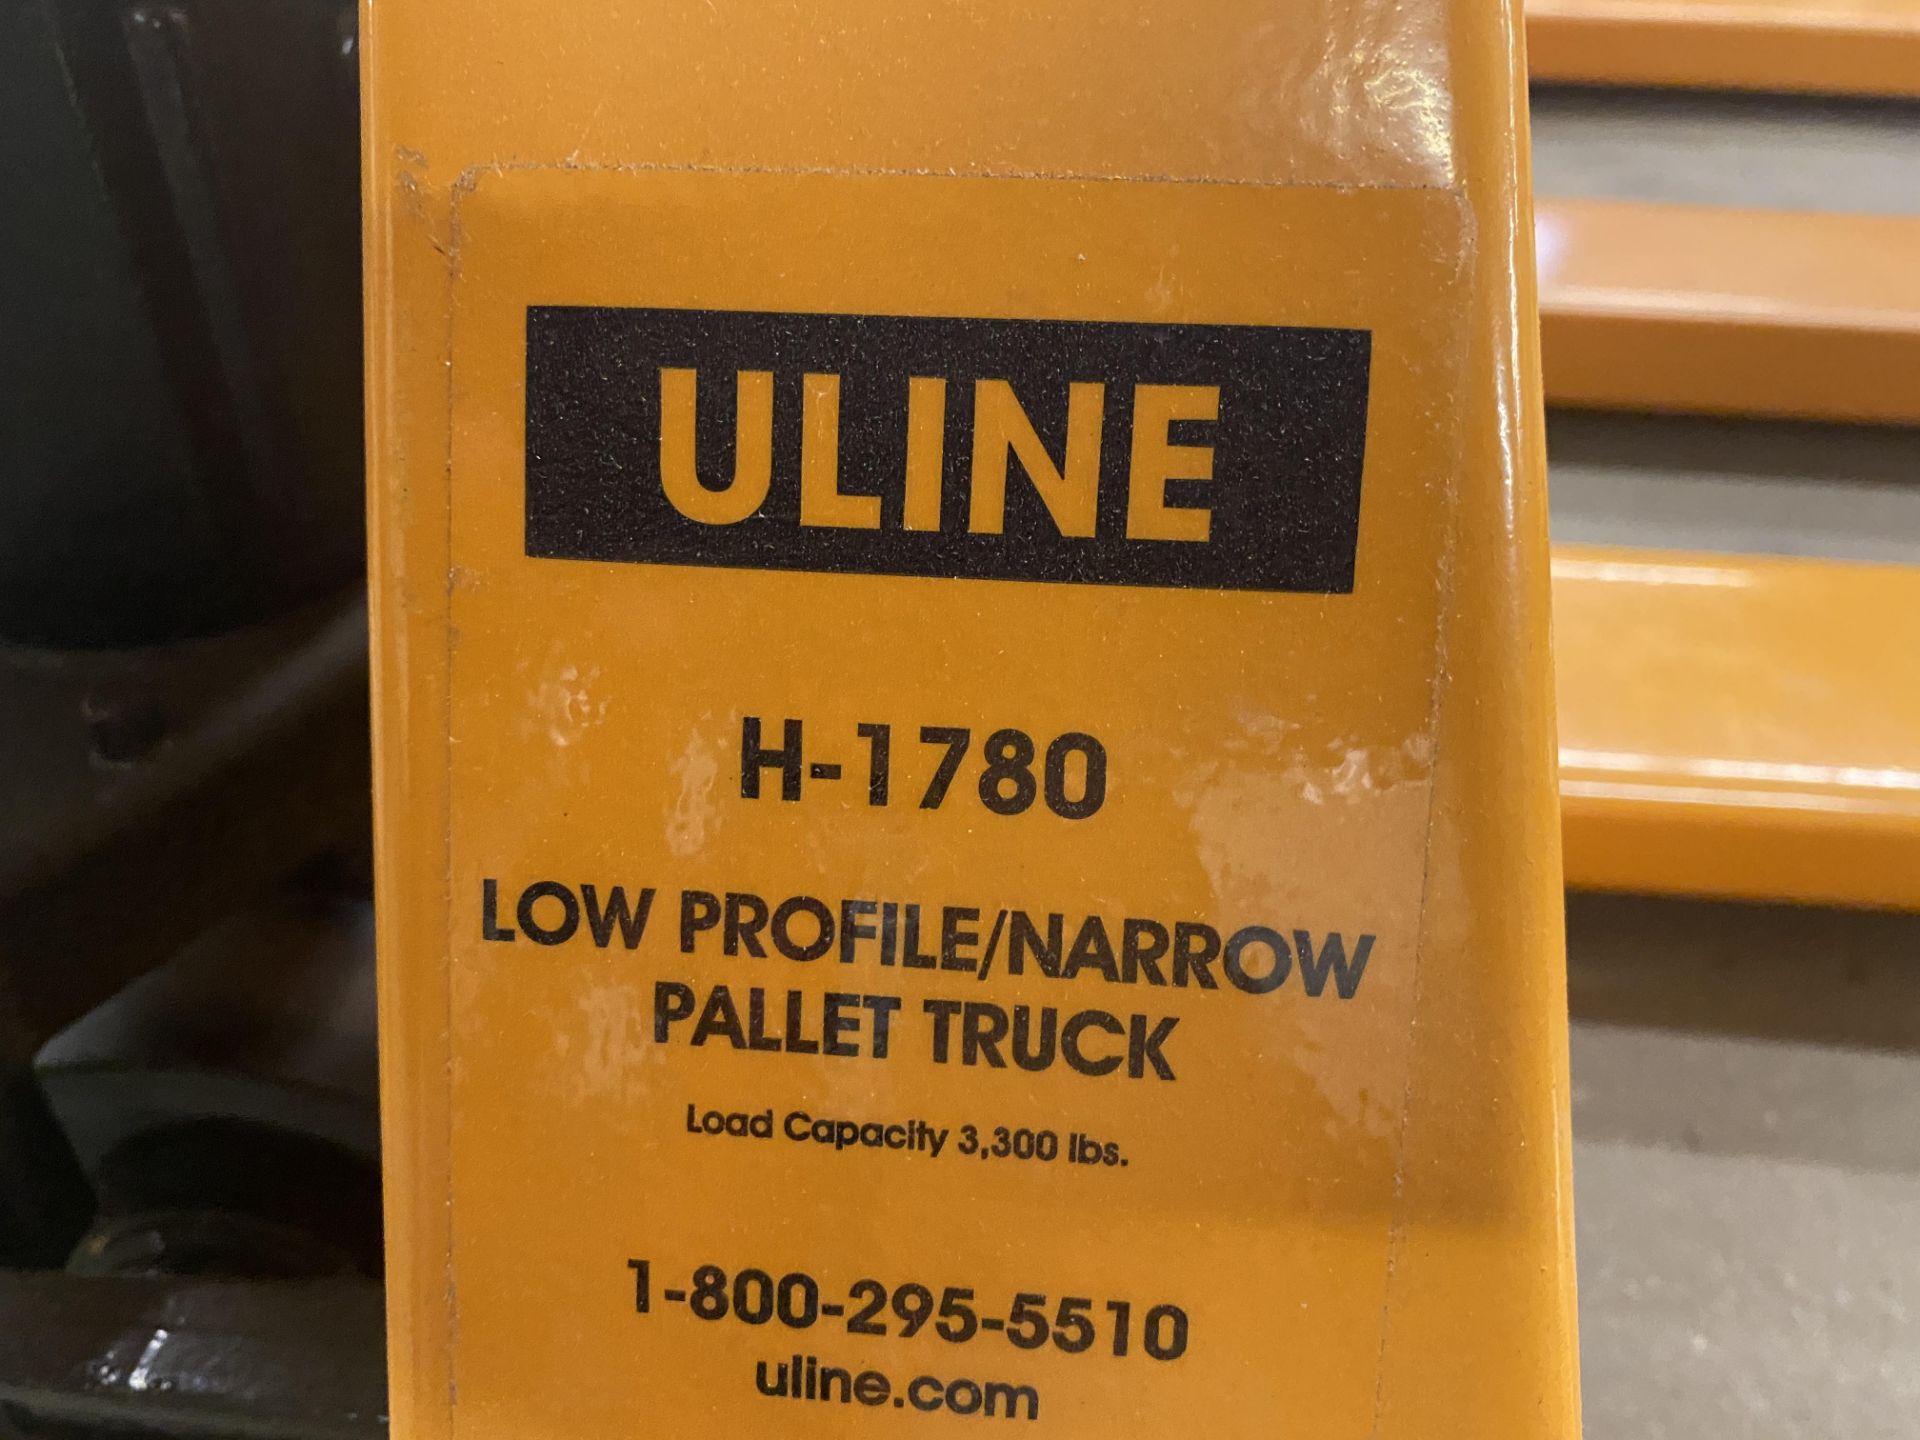 Uline H-1780 Low Profile/Narrow Hyd. Pallet Lift, 3,300# - Image 2 of 2